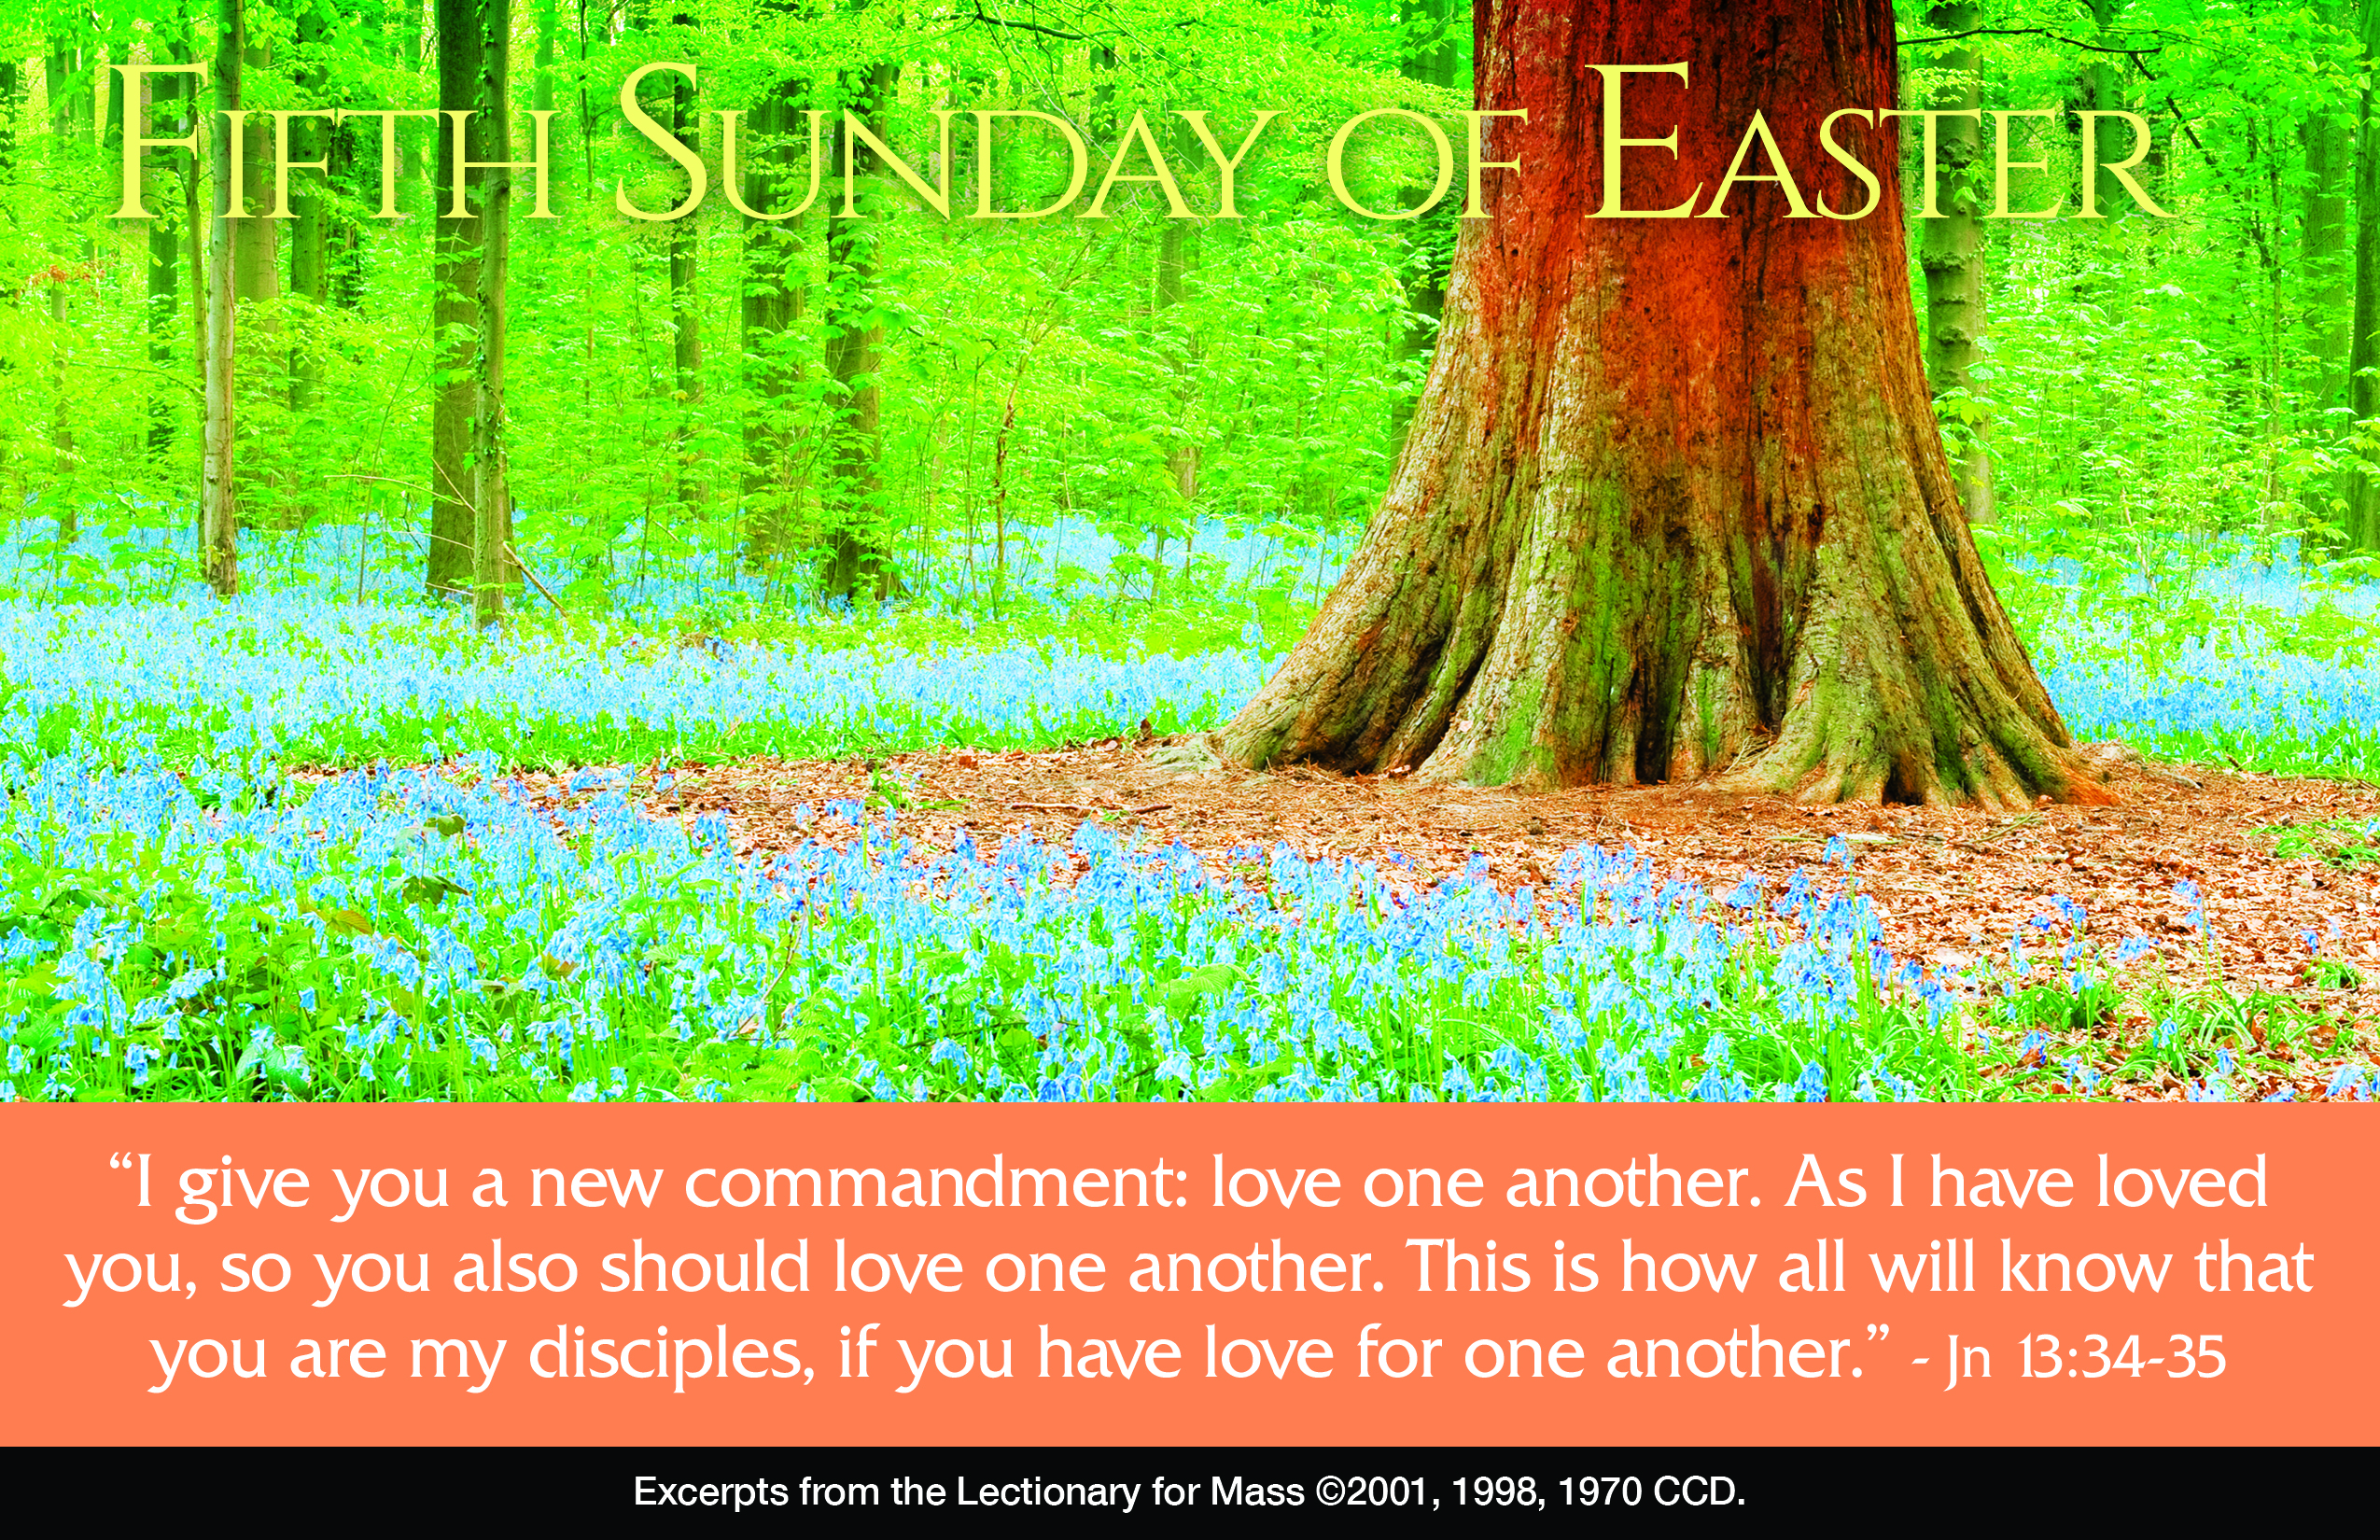 "We Must Undergo Many Trials" Reflection for the 5th Sunday of Easter